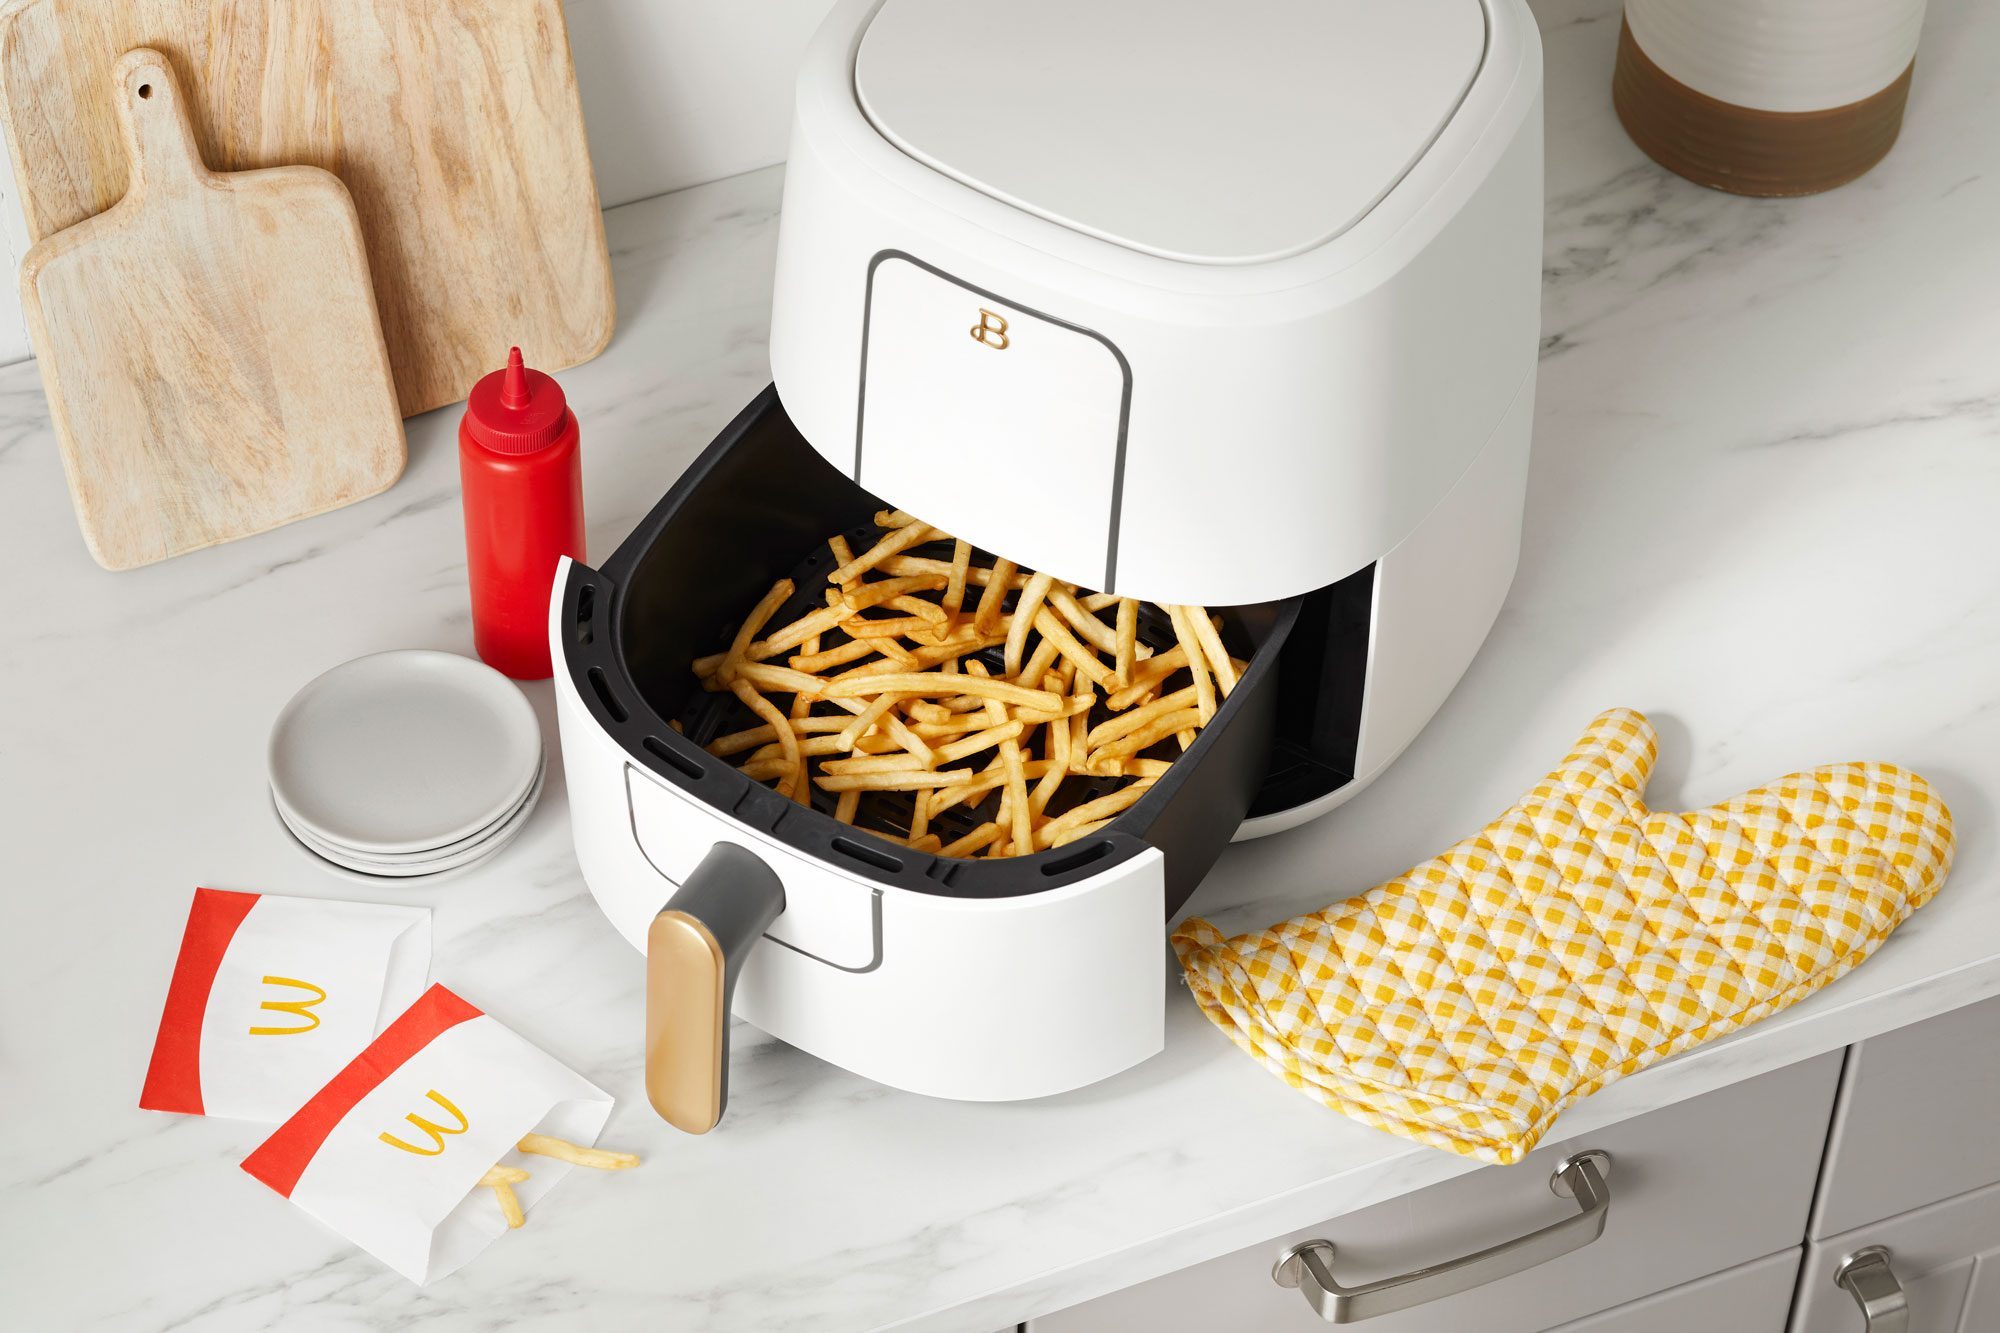 mcdonalds fries in the basket of an open air fryer on a kitchen counter